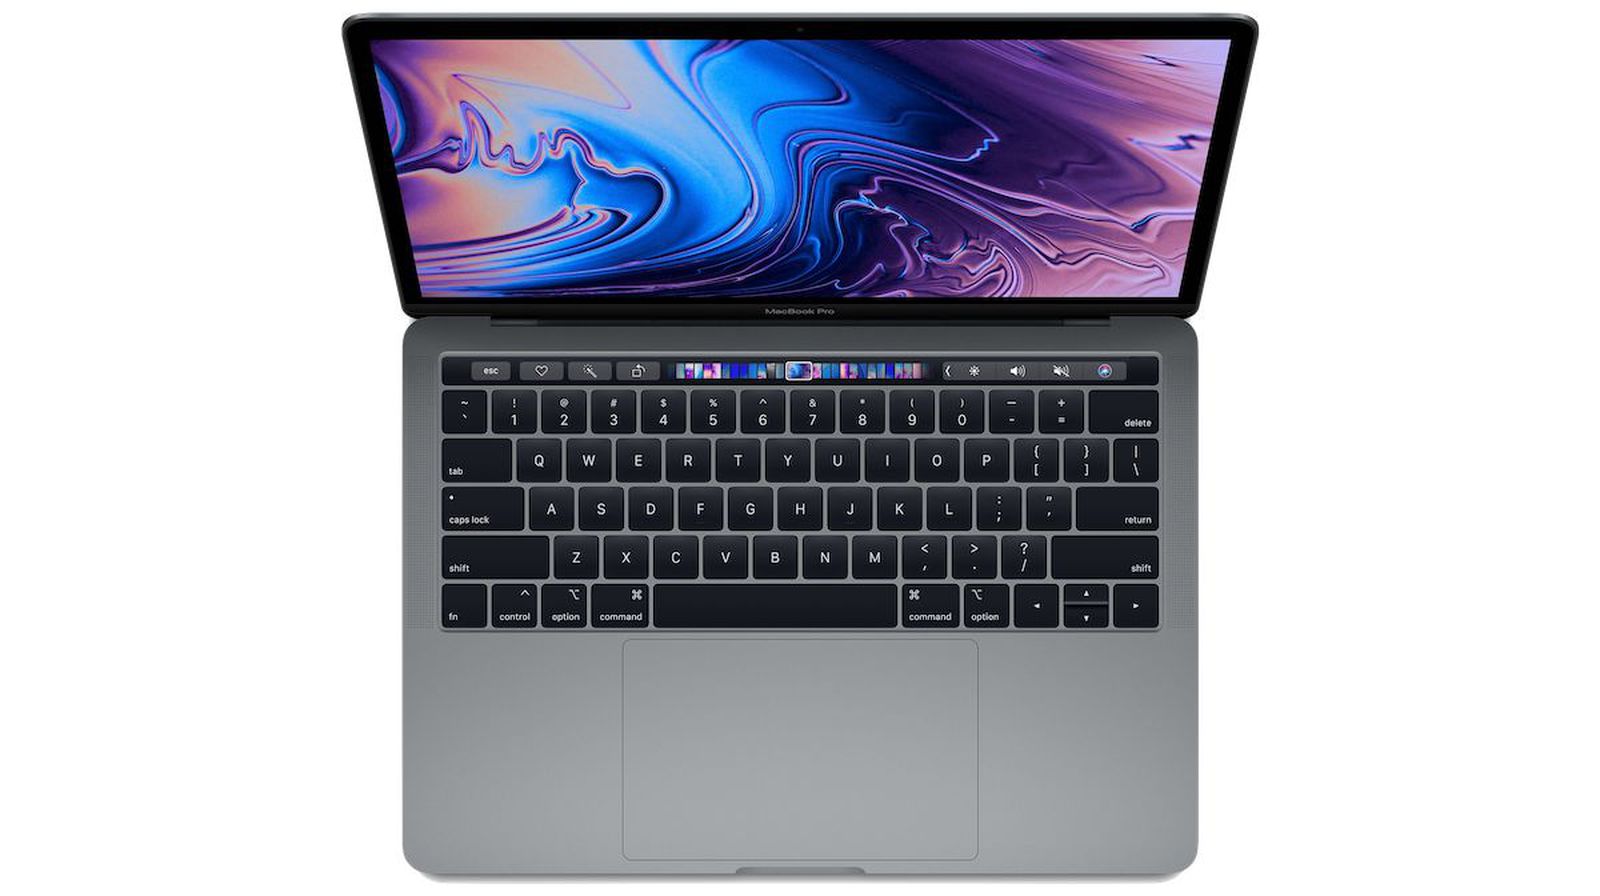 Upcoming 13-Inch MacBook Pro Models to Use Intel's 10th-Generation 